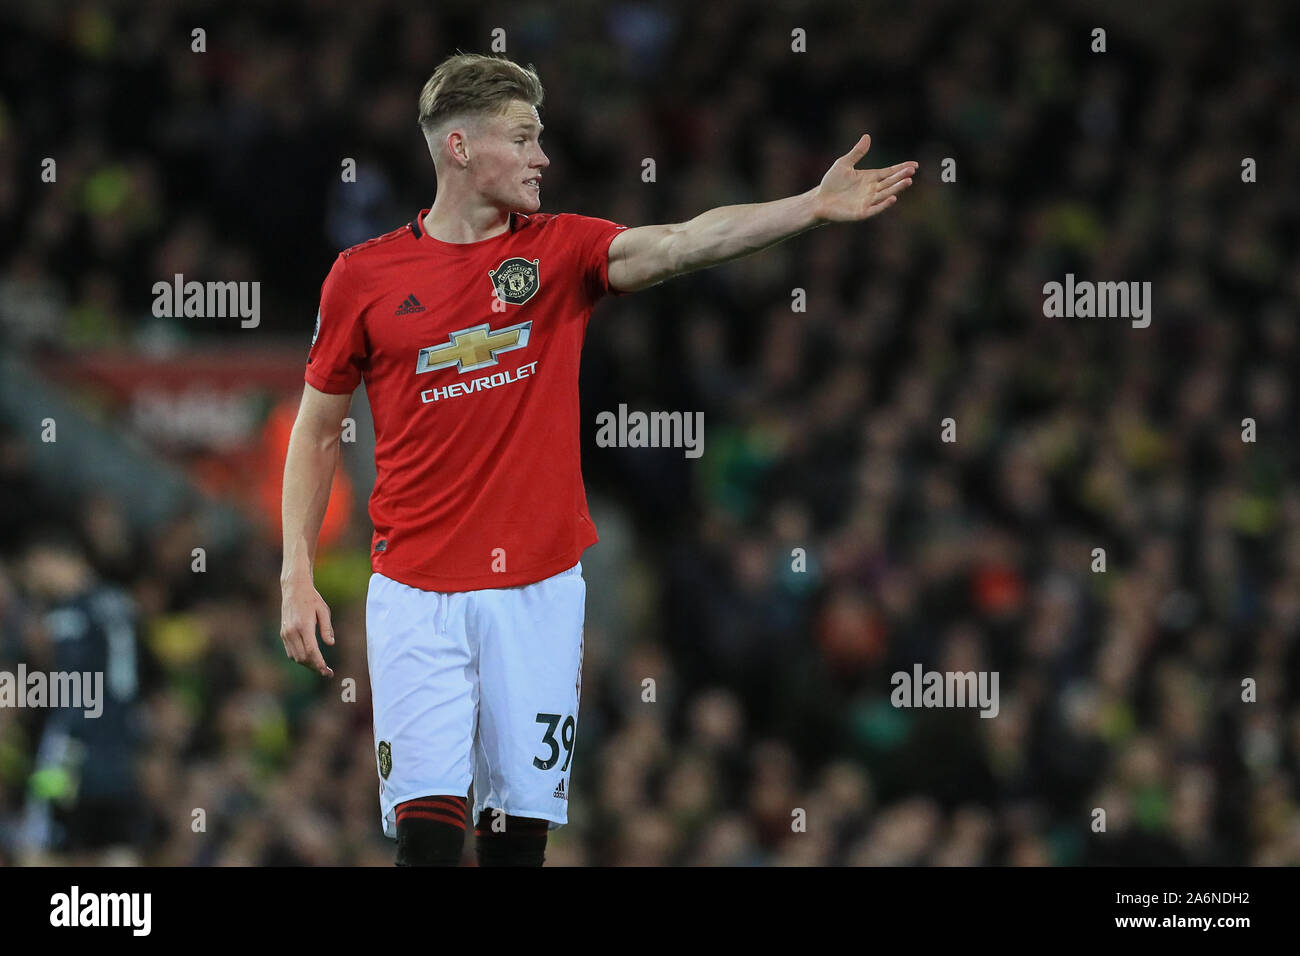 27th October 2019, Carrow Road, Norwich, England; Premier League, Norwich City v Manchester United : Scott McTominay (39) of Manchester United during the game Credit: Mark Cosgrove/News Images Stock Photo